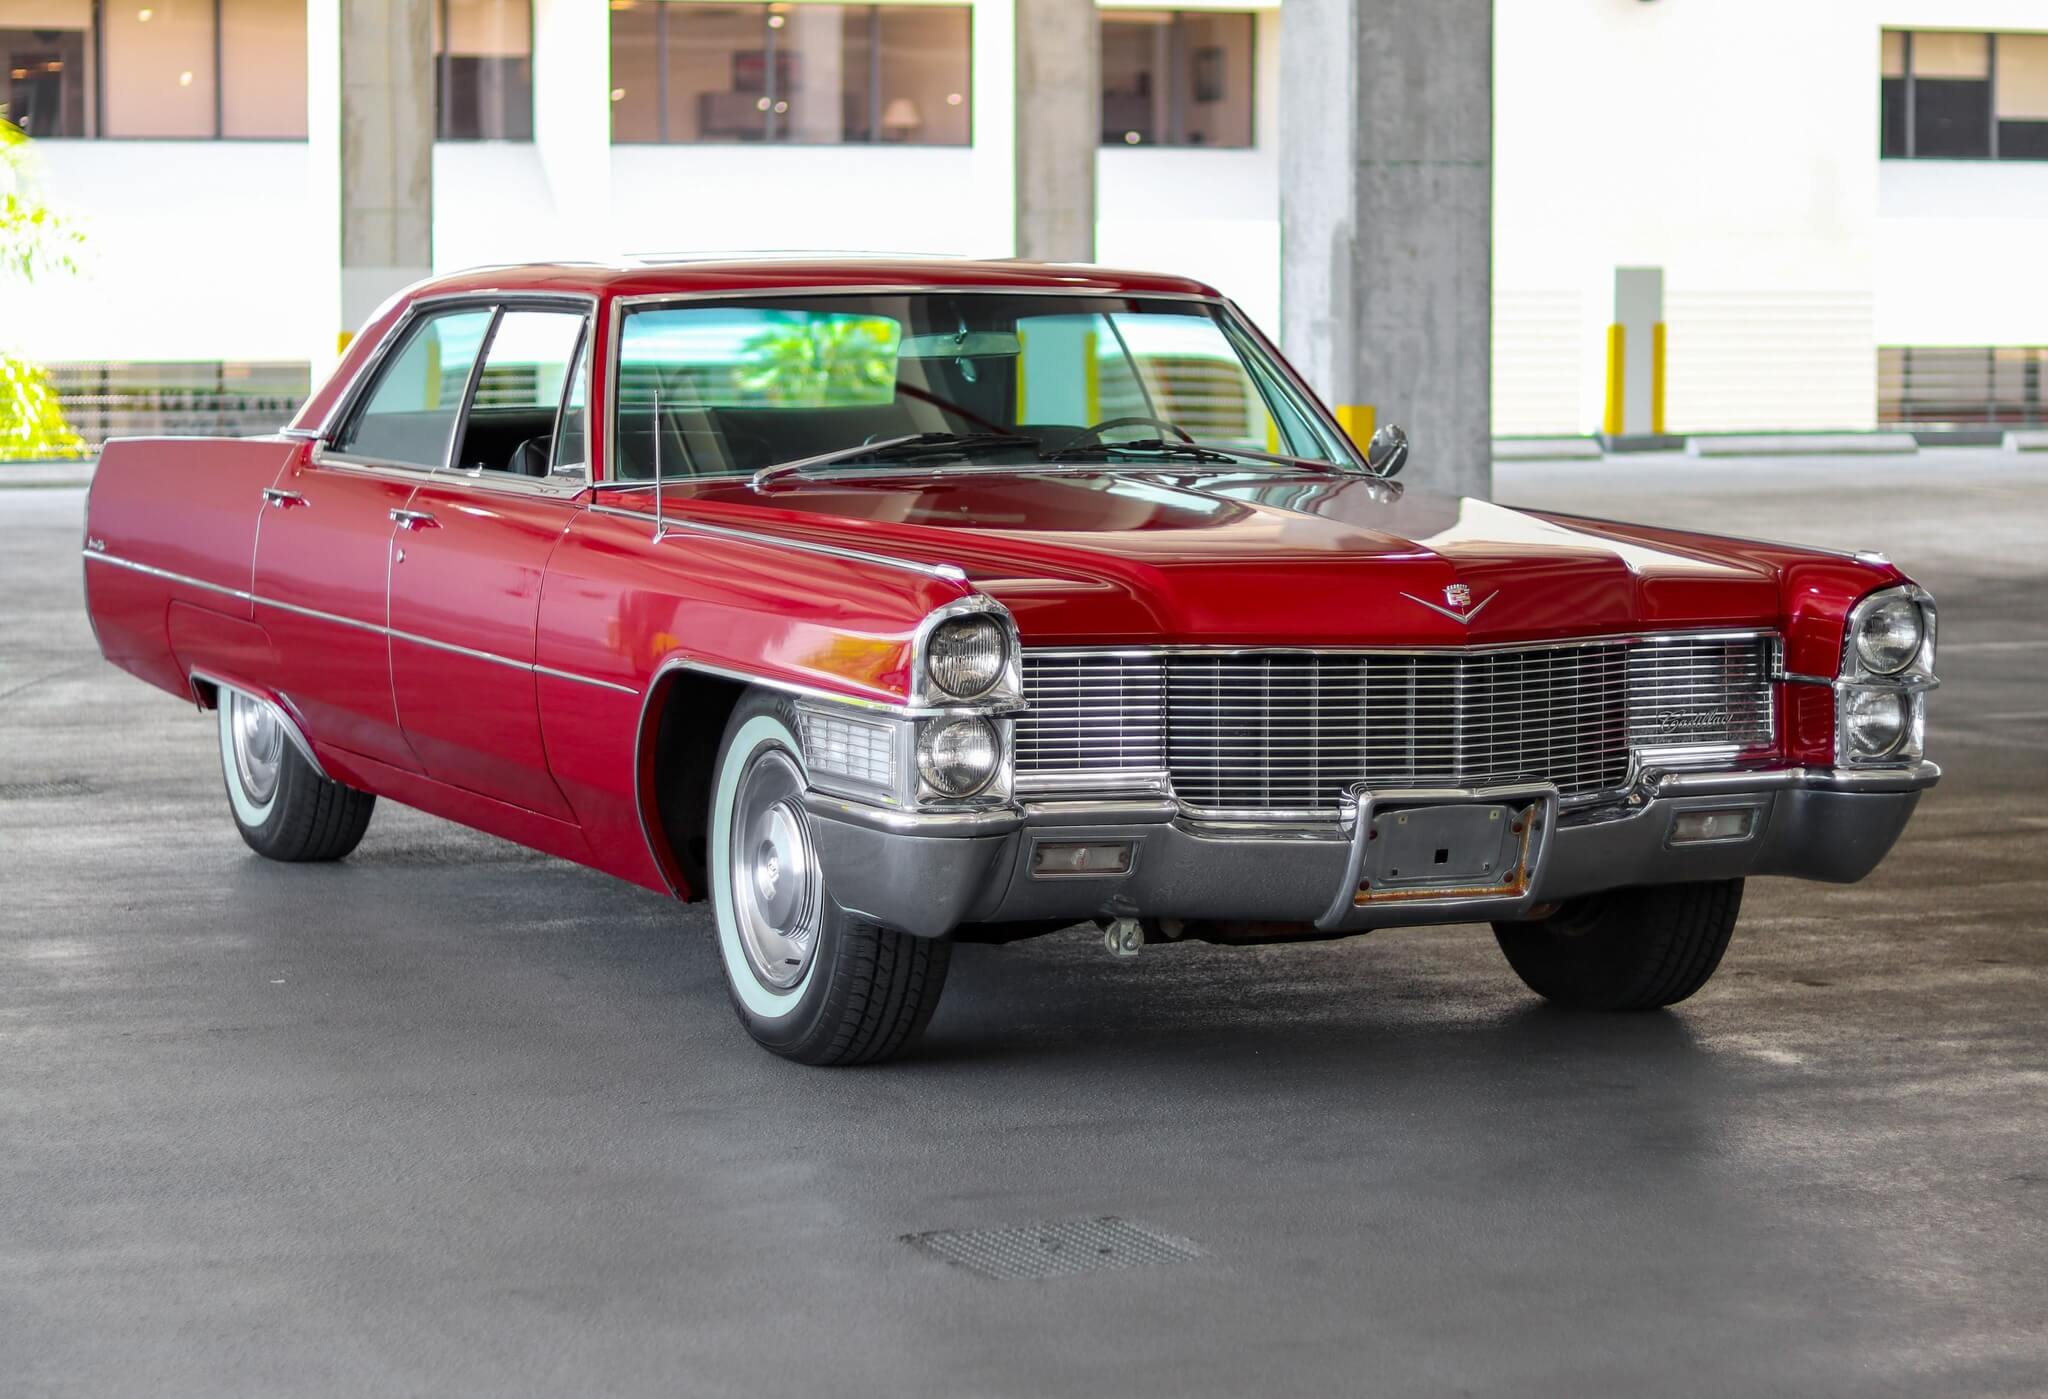 MY RIDE MY STORY 1973 Cadillac Coupe DeVille makes big impression